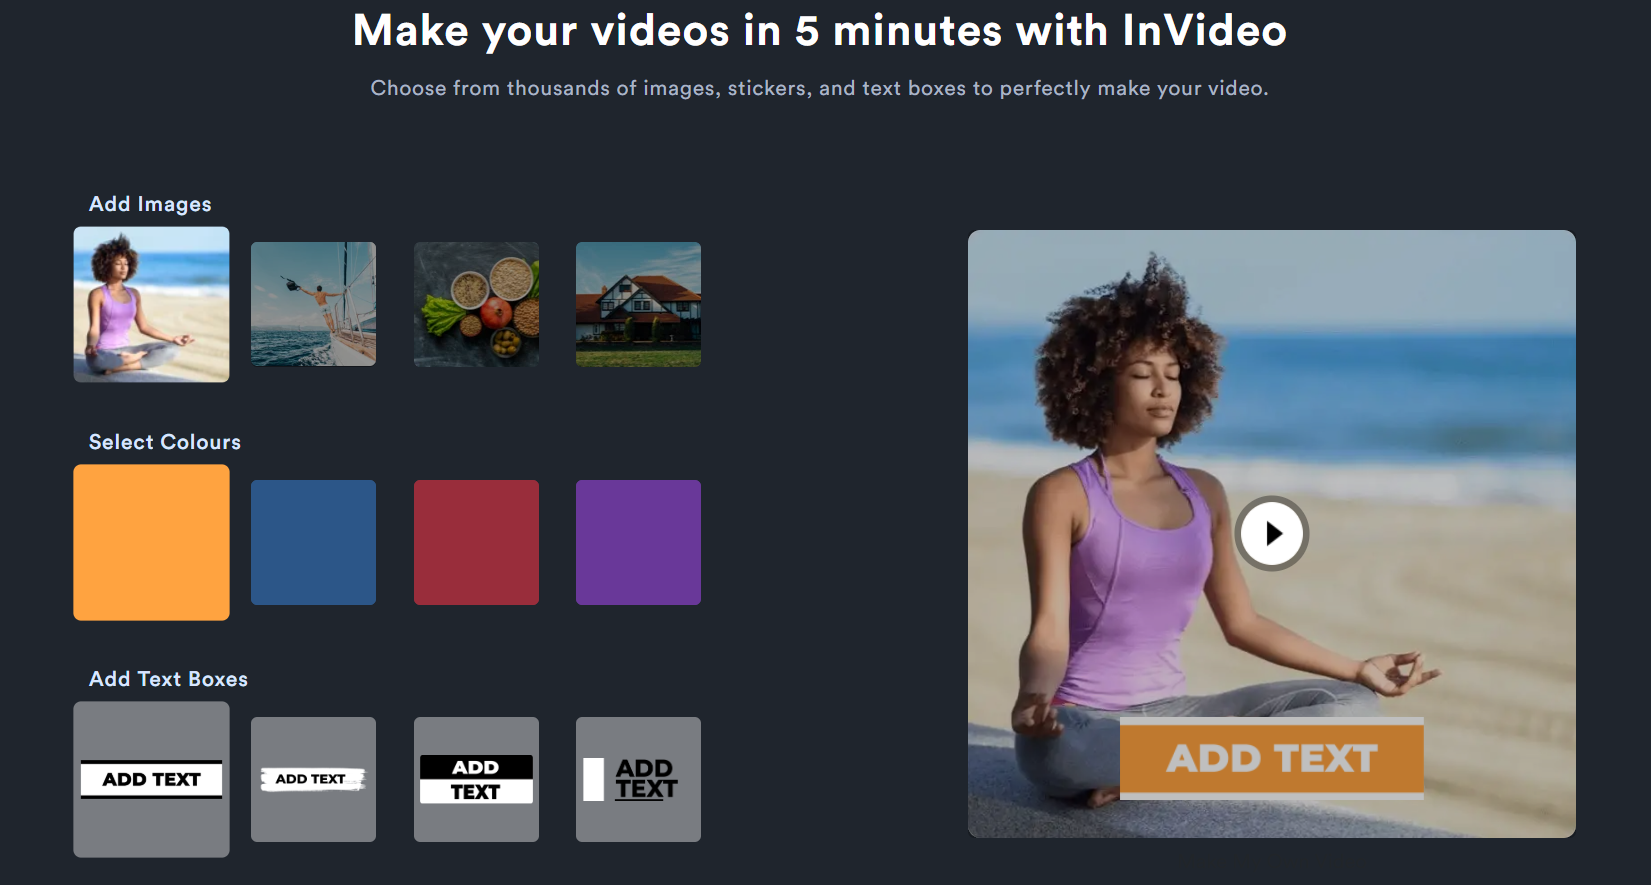 Make your videos with InVideo